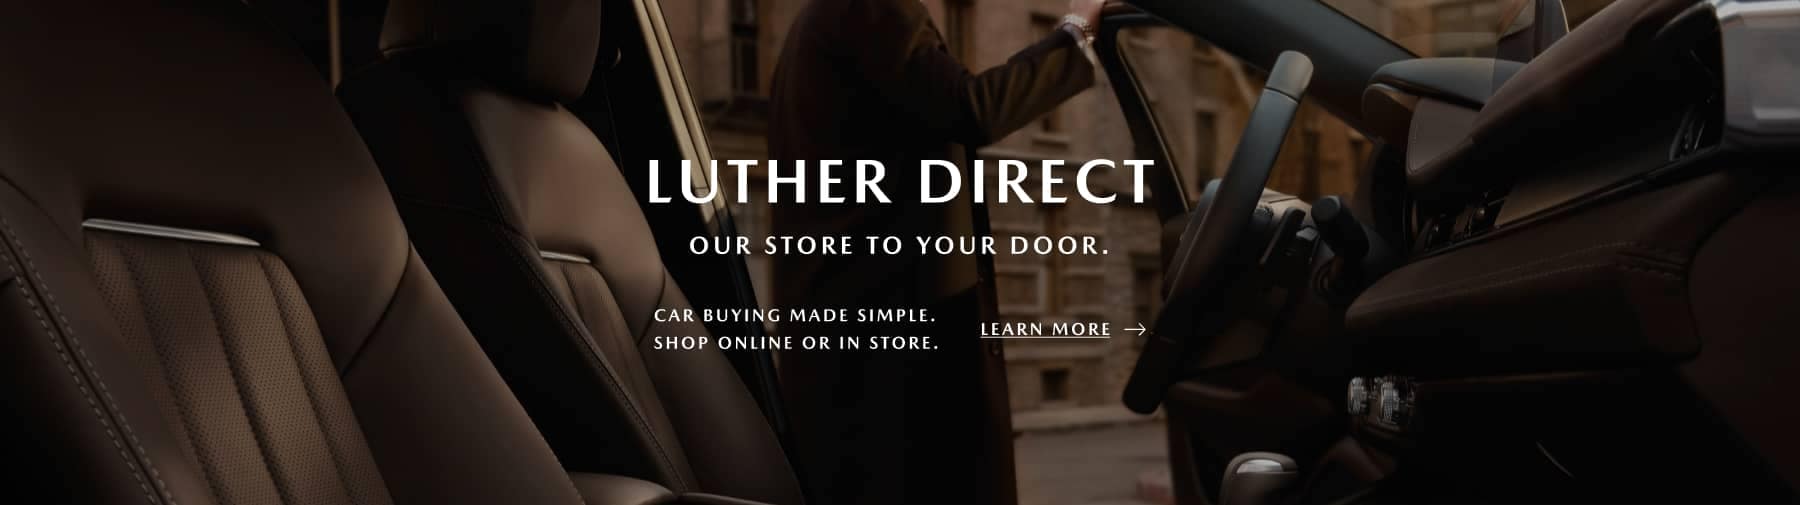 luther direct